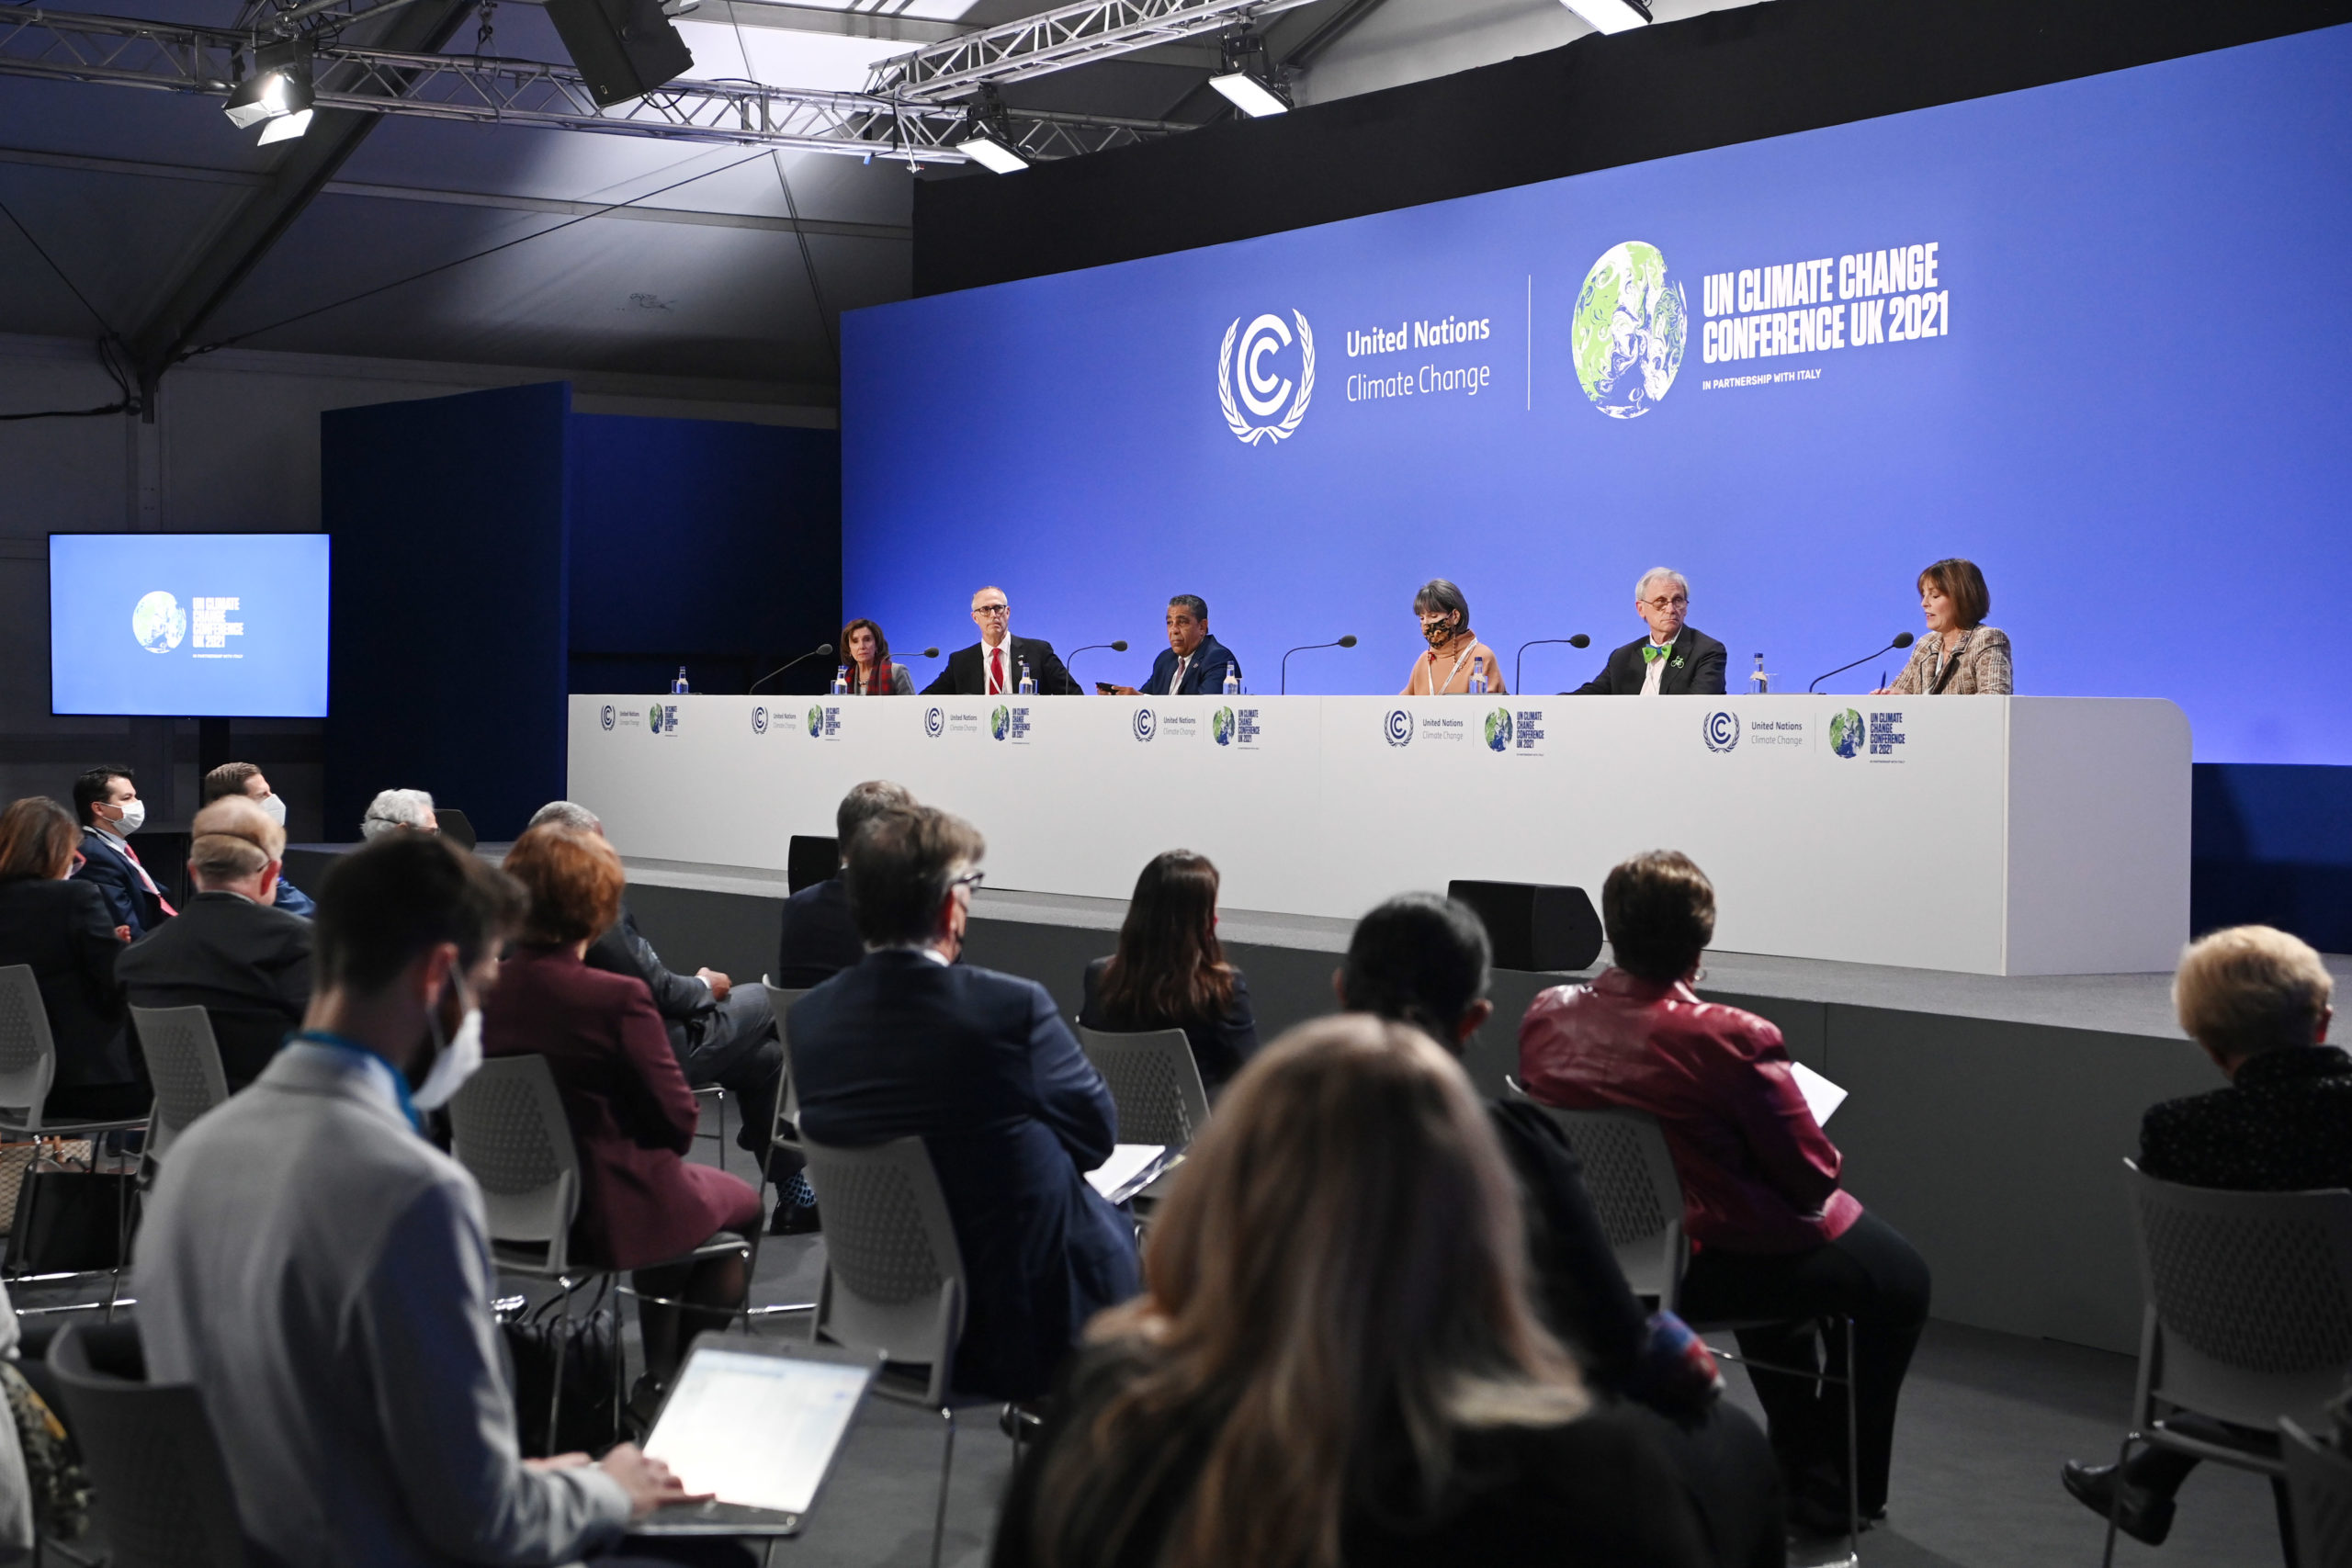 Speaker of the House Nancy Pelosi attends a press conference alongside fellow Democrats during COP26 on Nov. 10 in Glasgow, Scotland. (Jeff J. Mitchell/Getty Images)